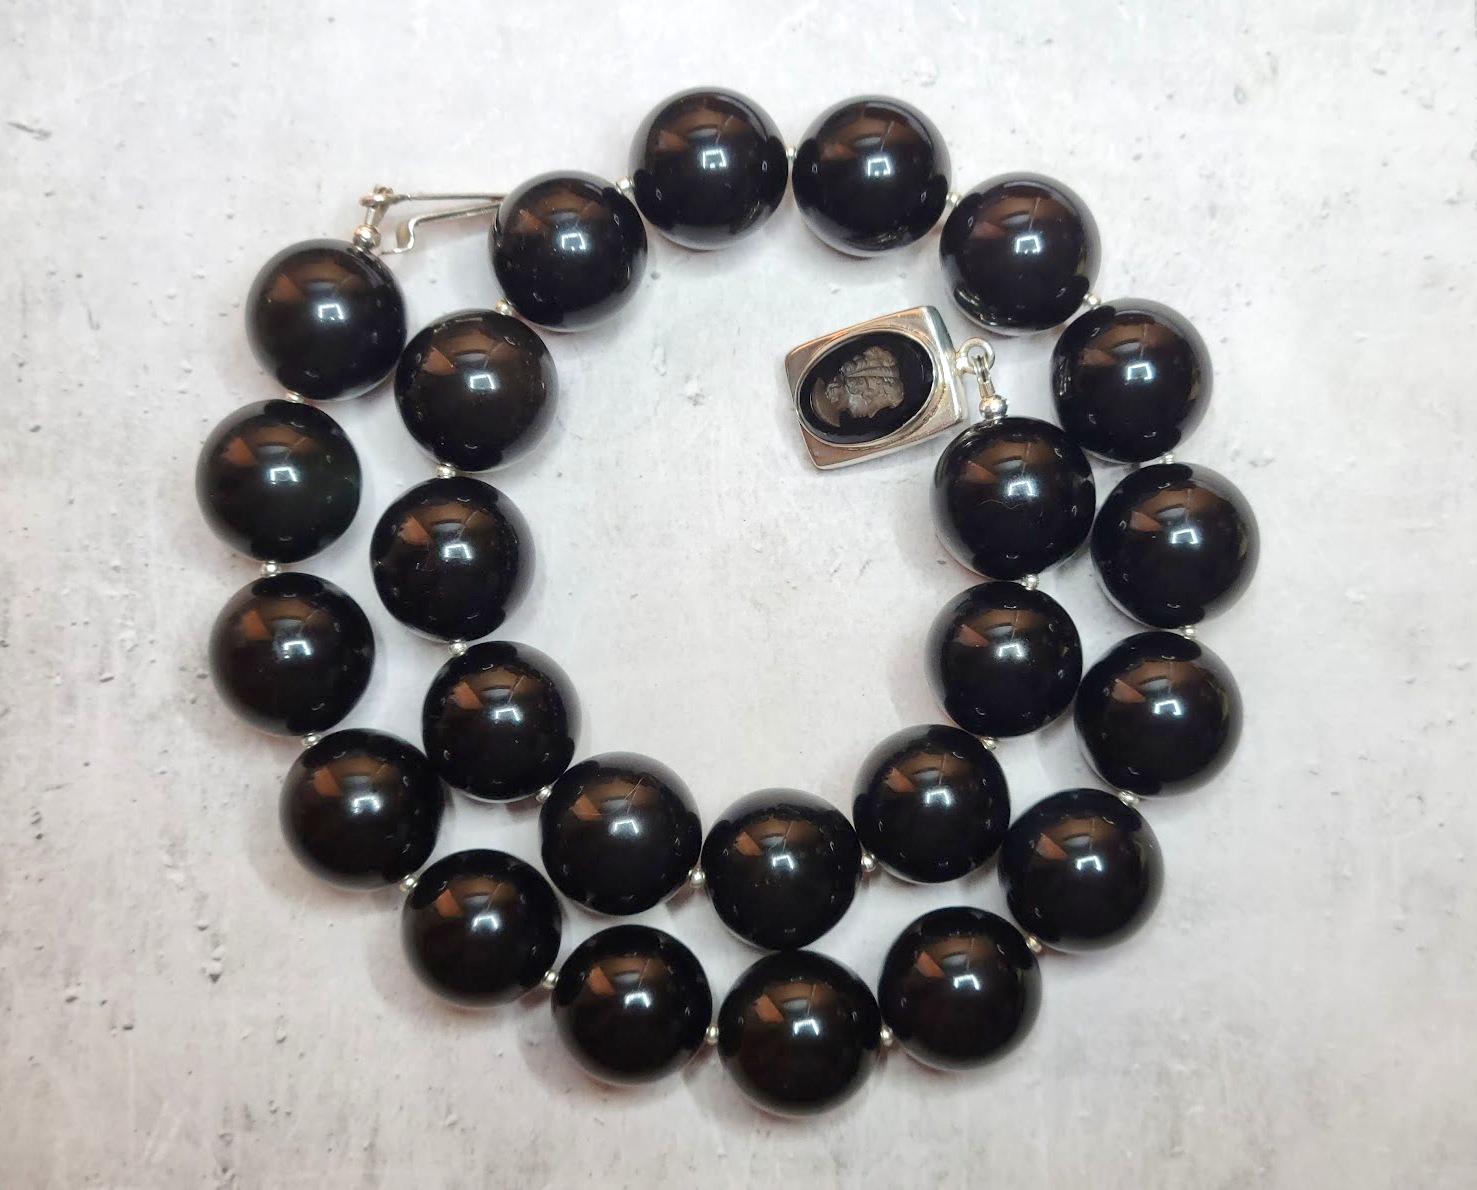 The length of the necklace is 21 inches (53 cm). The size of the beads is 20 mm. Large, round obsidian beads are quite rare.
The color of the beads is uniformly black with a glossy sheen.
The color is authentic and natural. No thermal or other